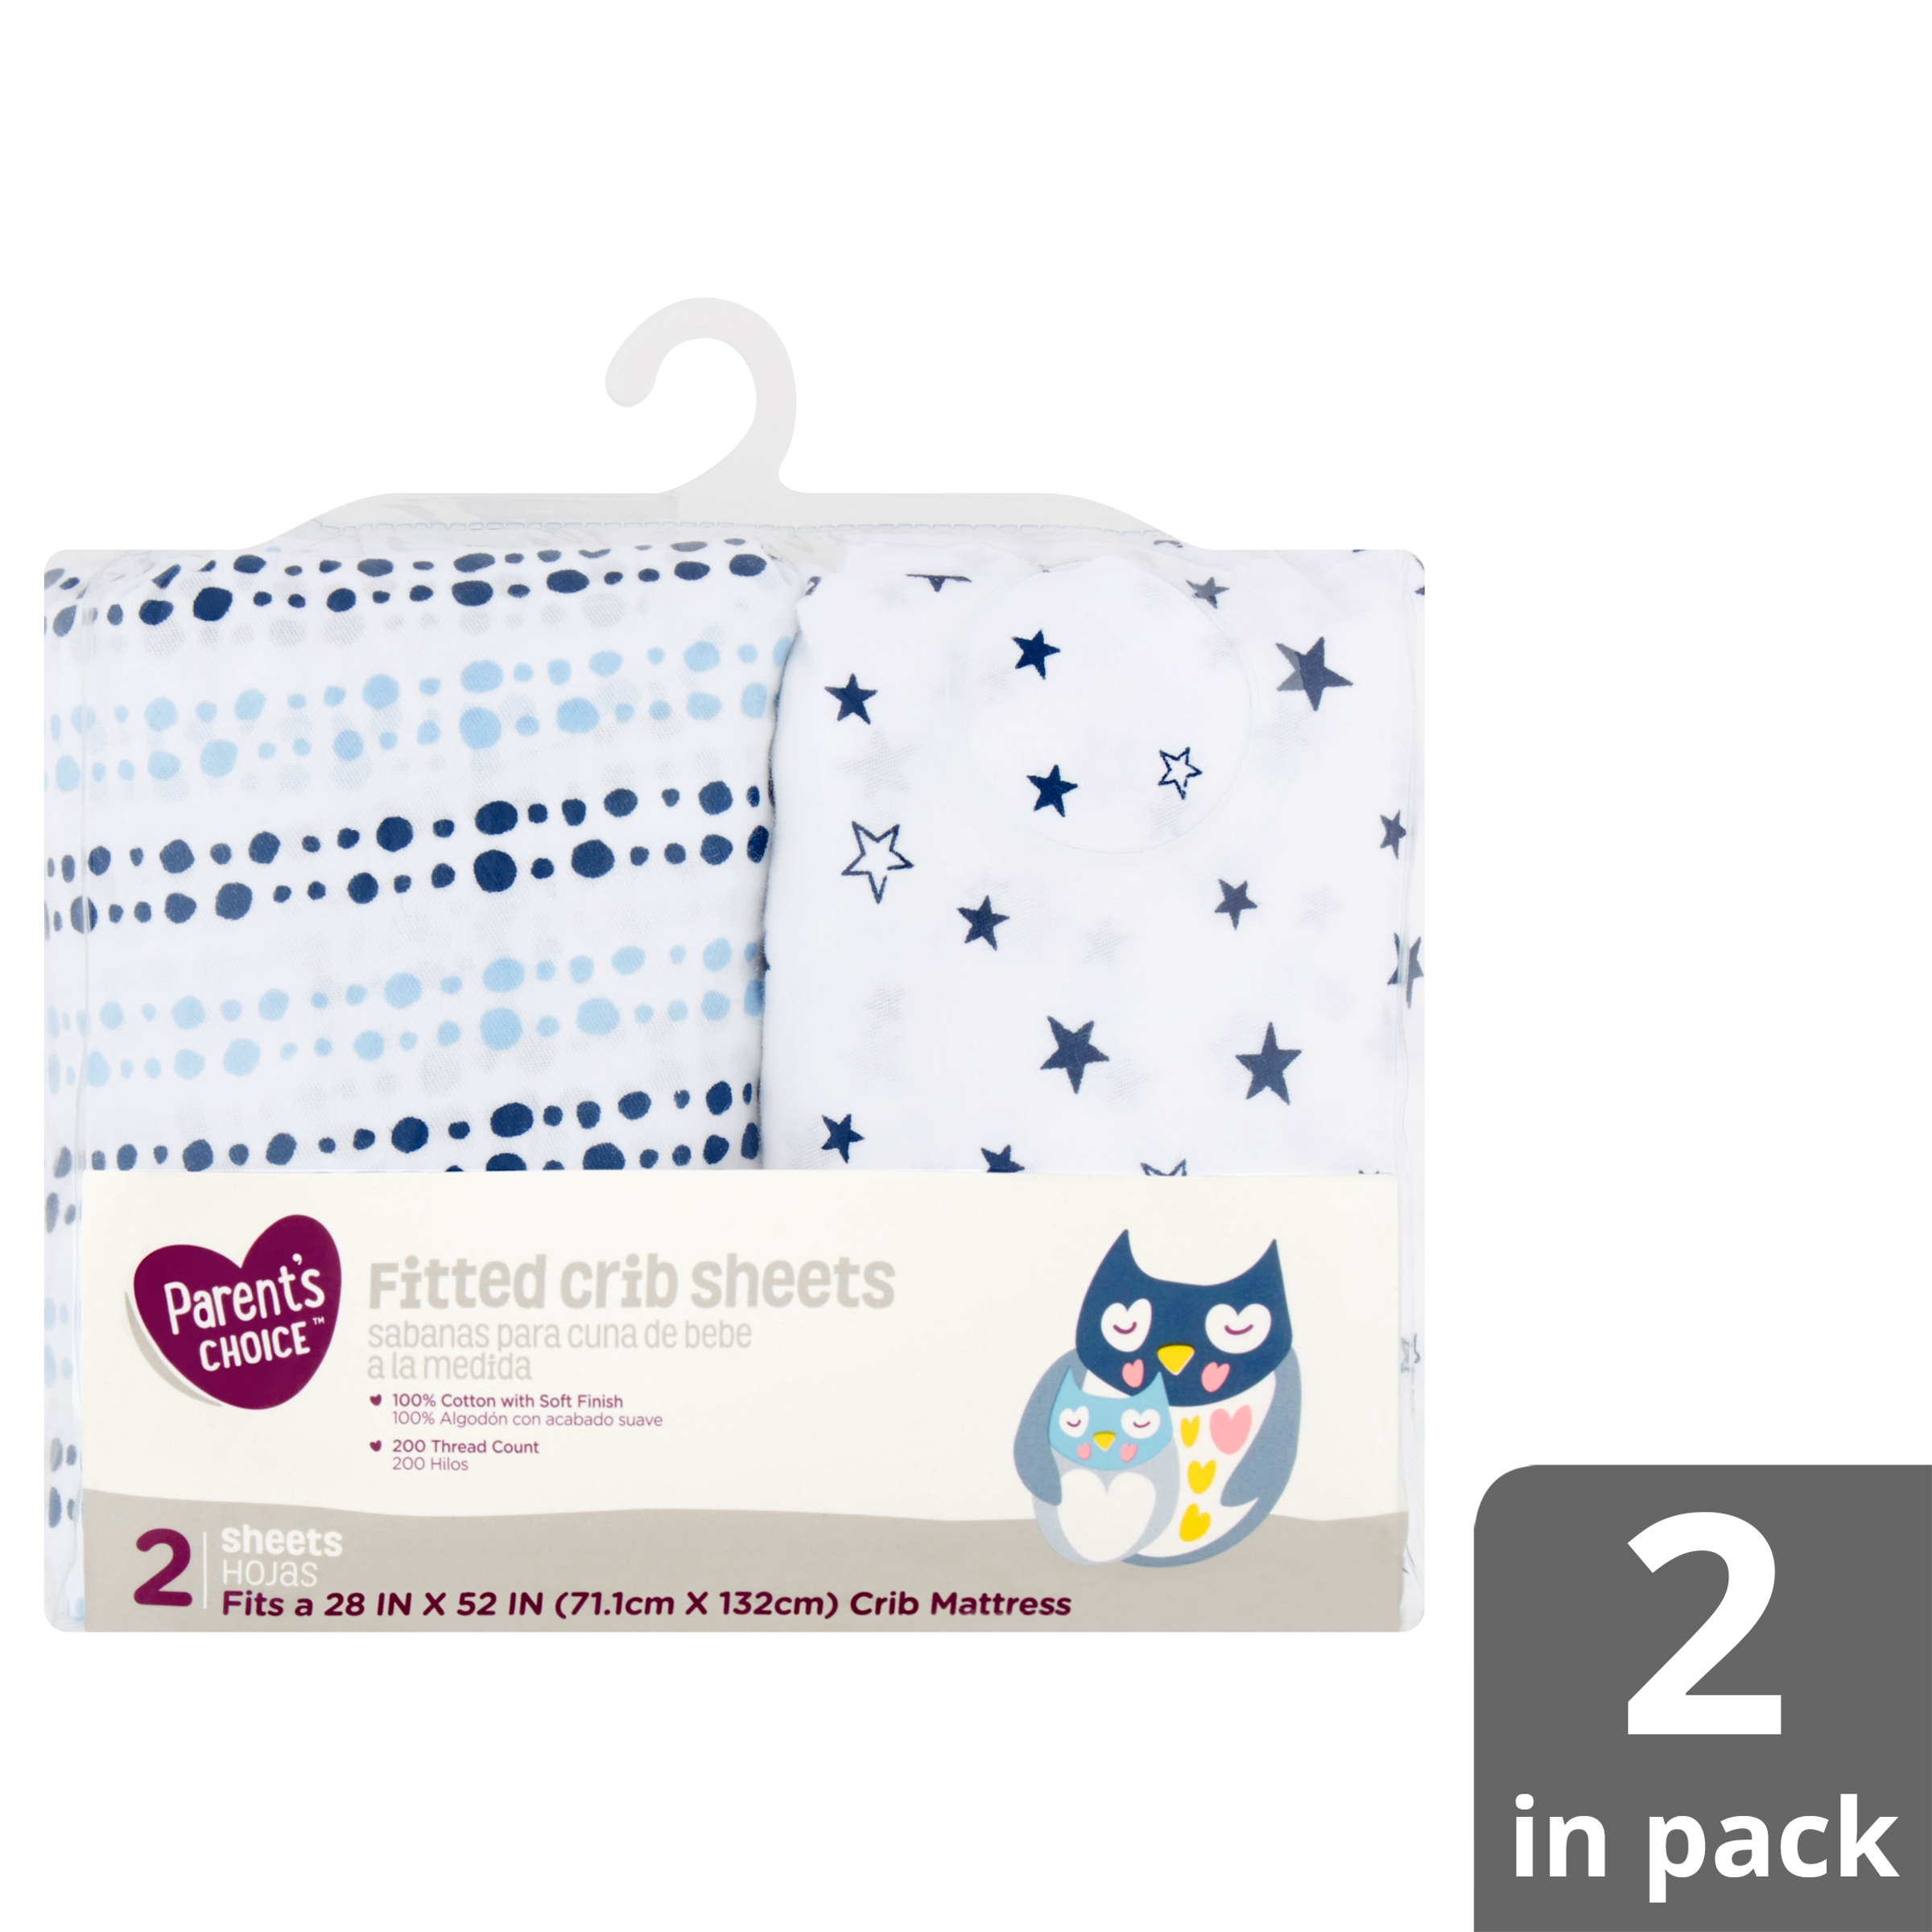 Parent's Choice 100% Cotton Fitted Crib Sheets, Blue Star 2pk - image 4 of 6